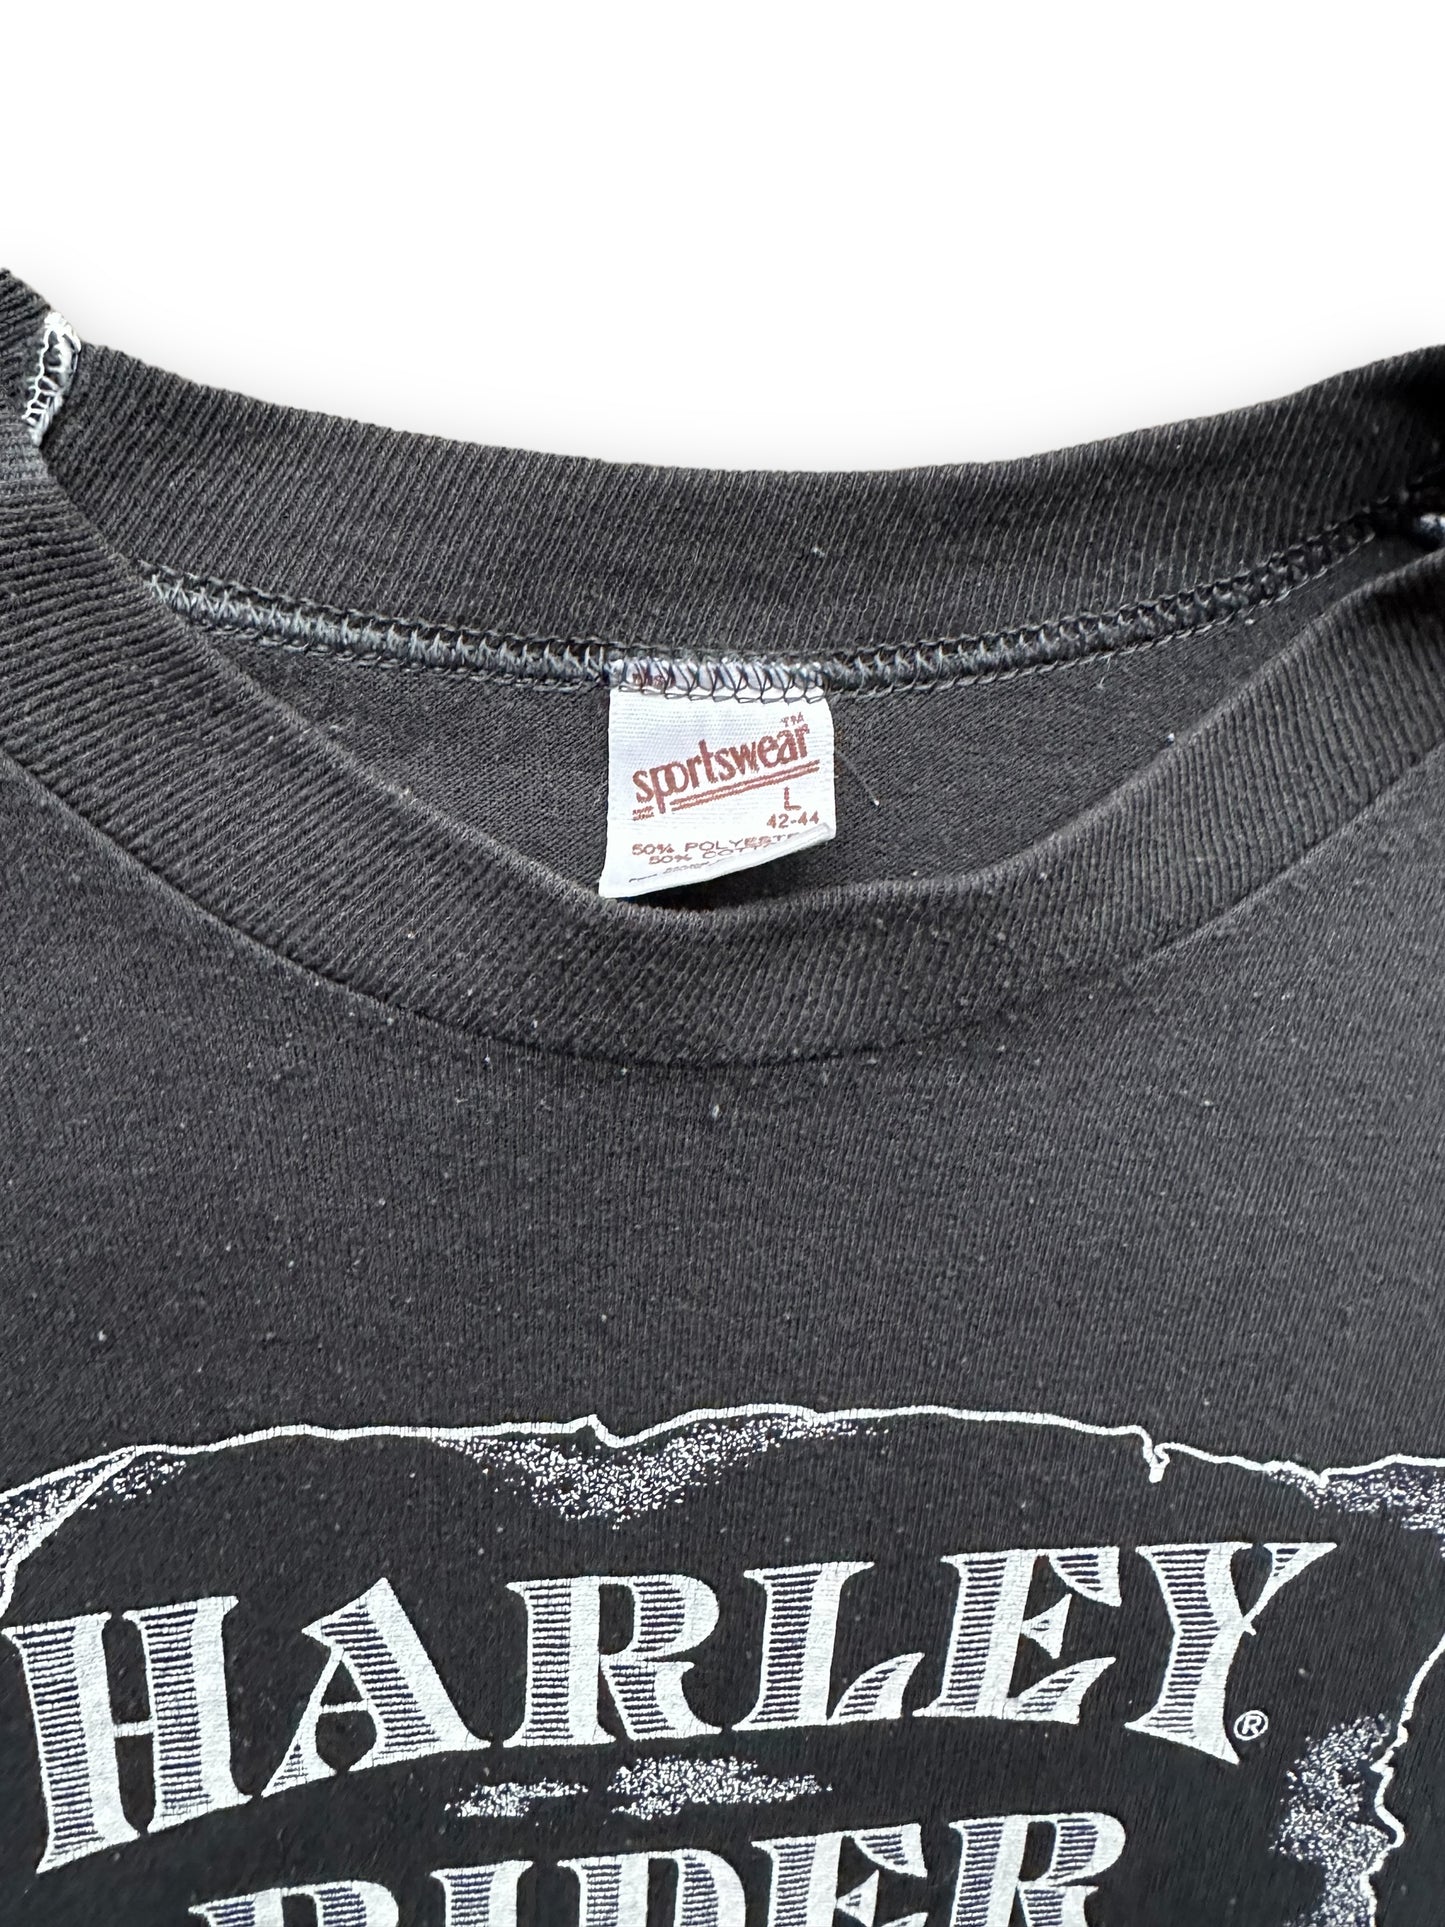 Tag View on Vintage 1980s Harley Davidson Rider Tee SZ L | Vintage Harley Tee Seattle | Barn Owl Vintage Seattle